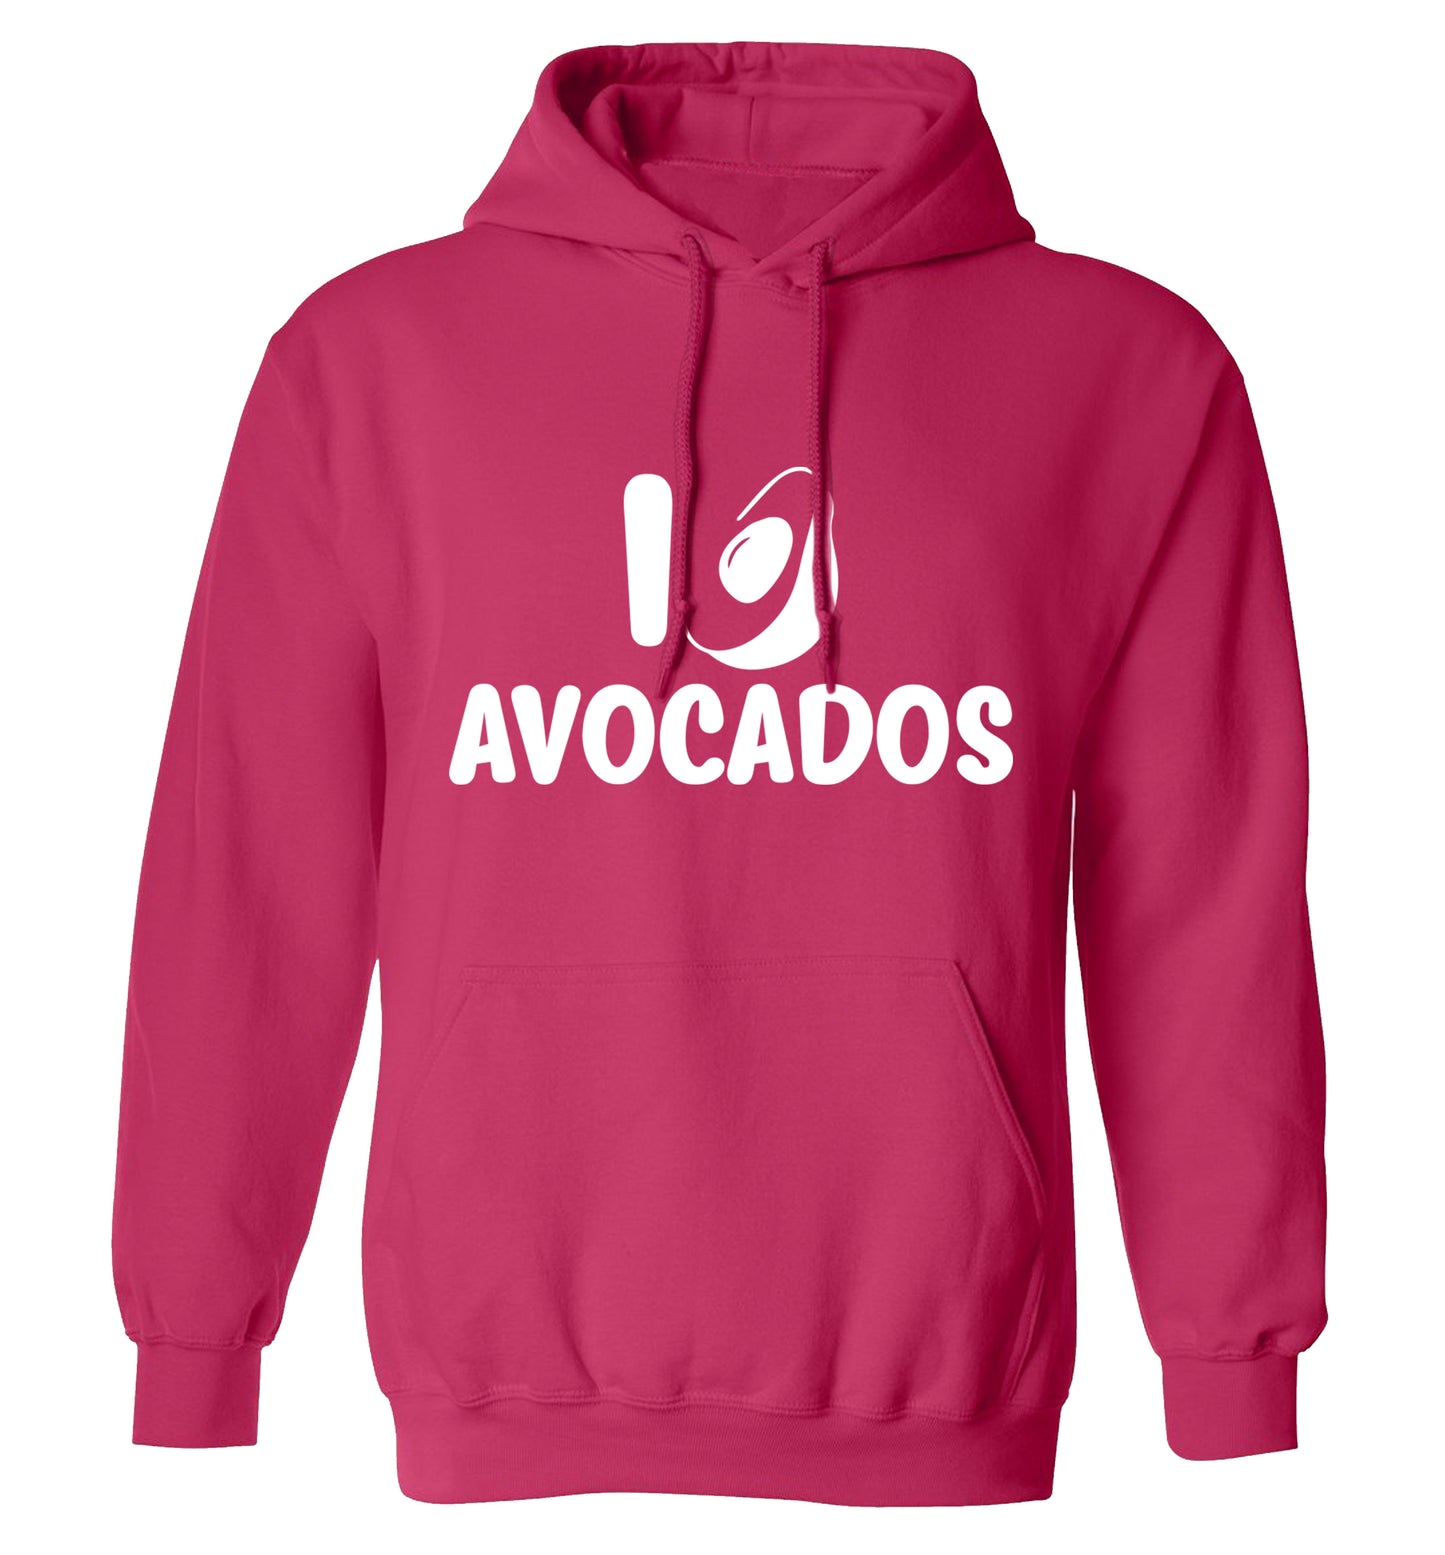 I love avocados adults unisex pink hoodie 2XL